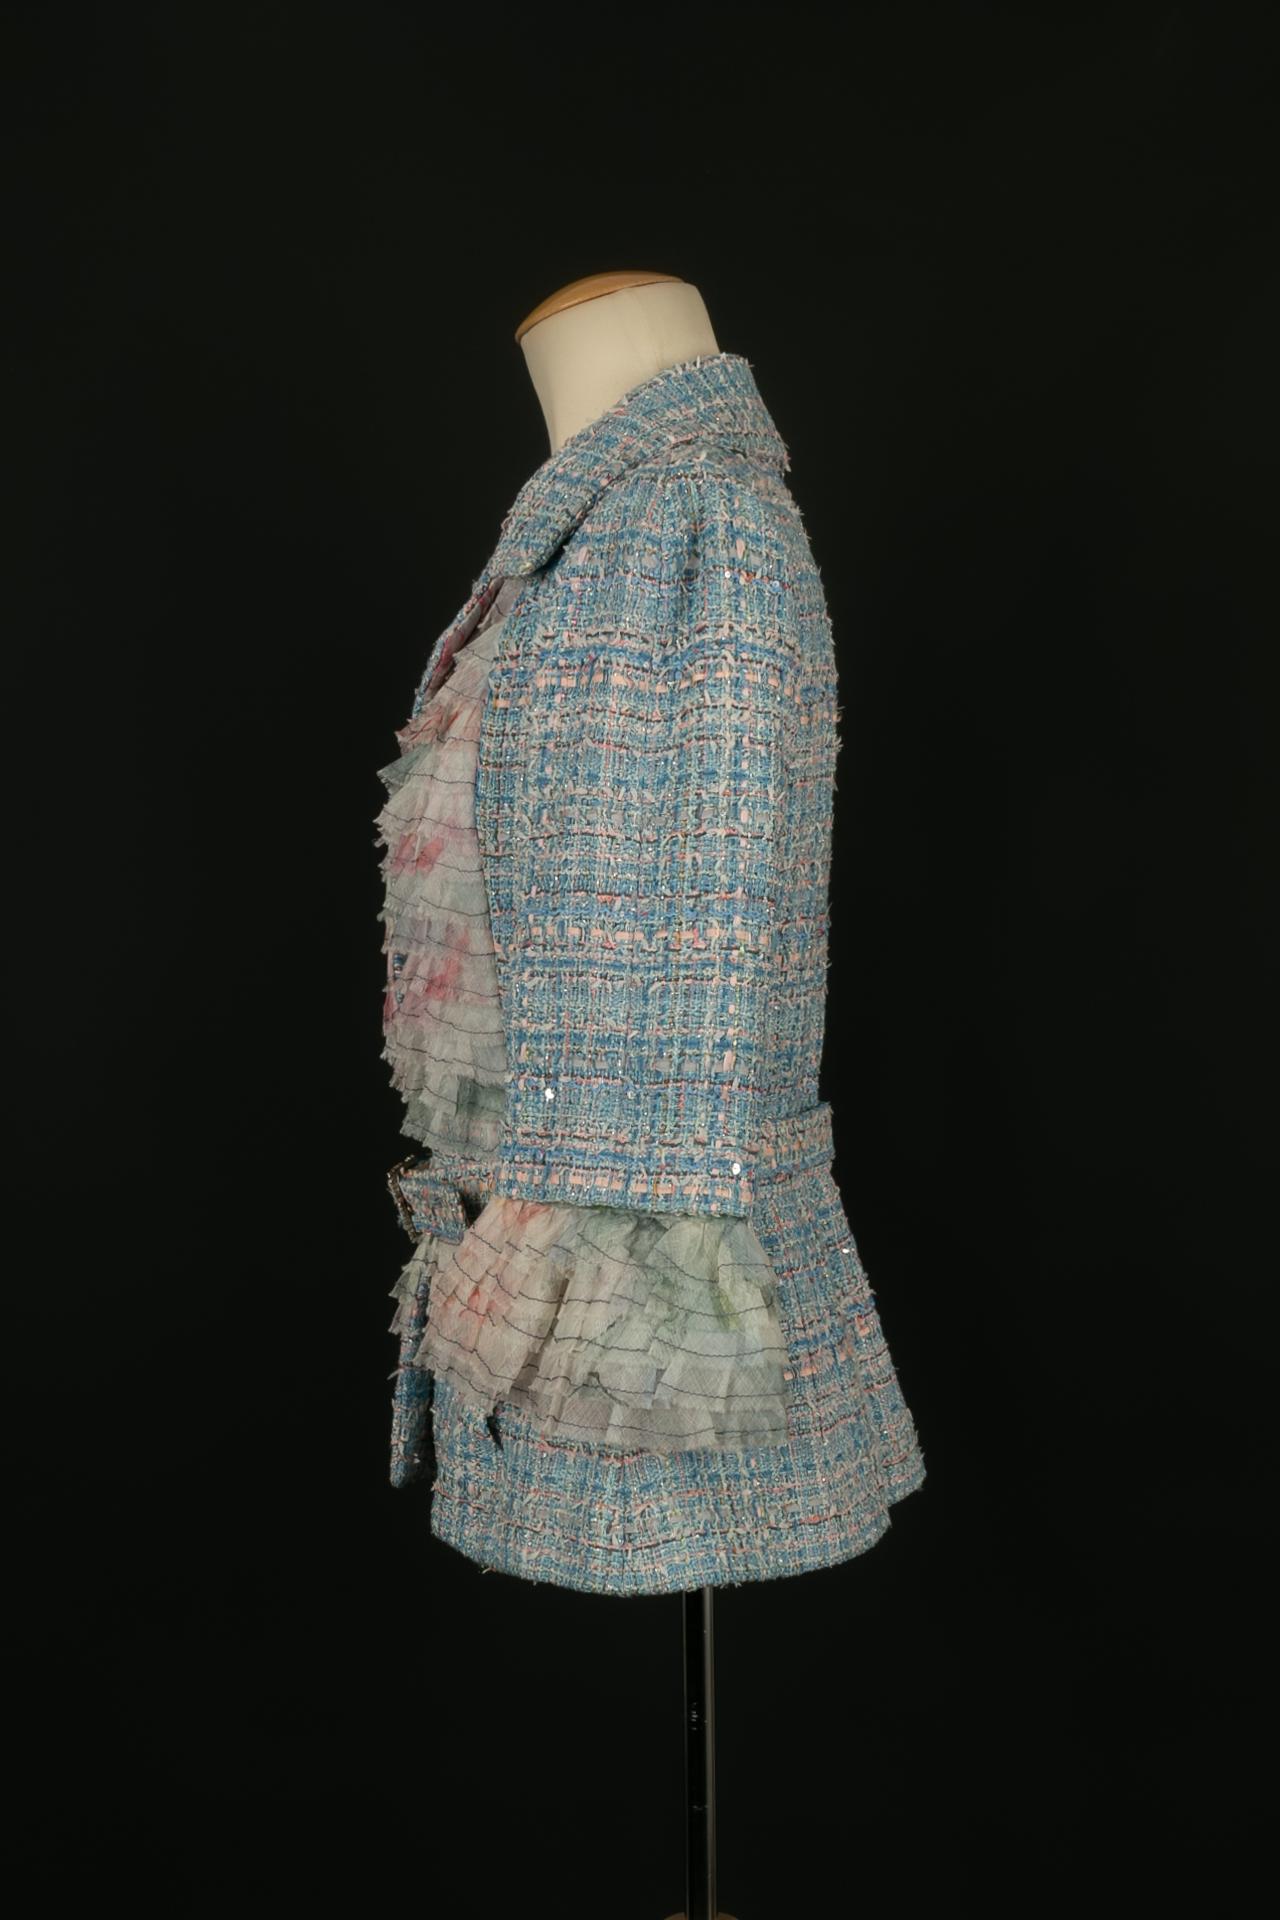 CHANEL - (Made in France) Tweed jacket in blue and pink tones. Size 40FR. 
Resort 2013 collection.

Condition:
Very good condition

Dimensions:
Shoulder width: 40 cm - Chest: 47 cm - Waist: 37 cm - Sleeve length: 49 cm - Length: 61 cm